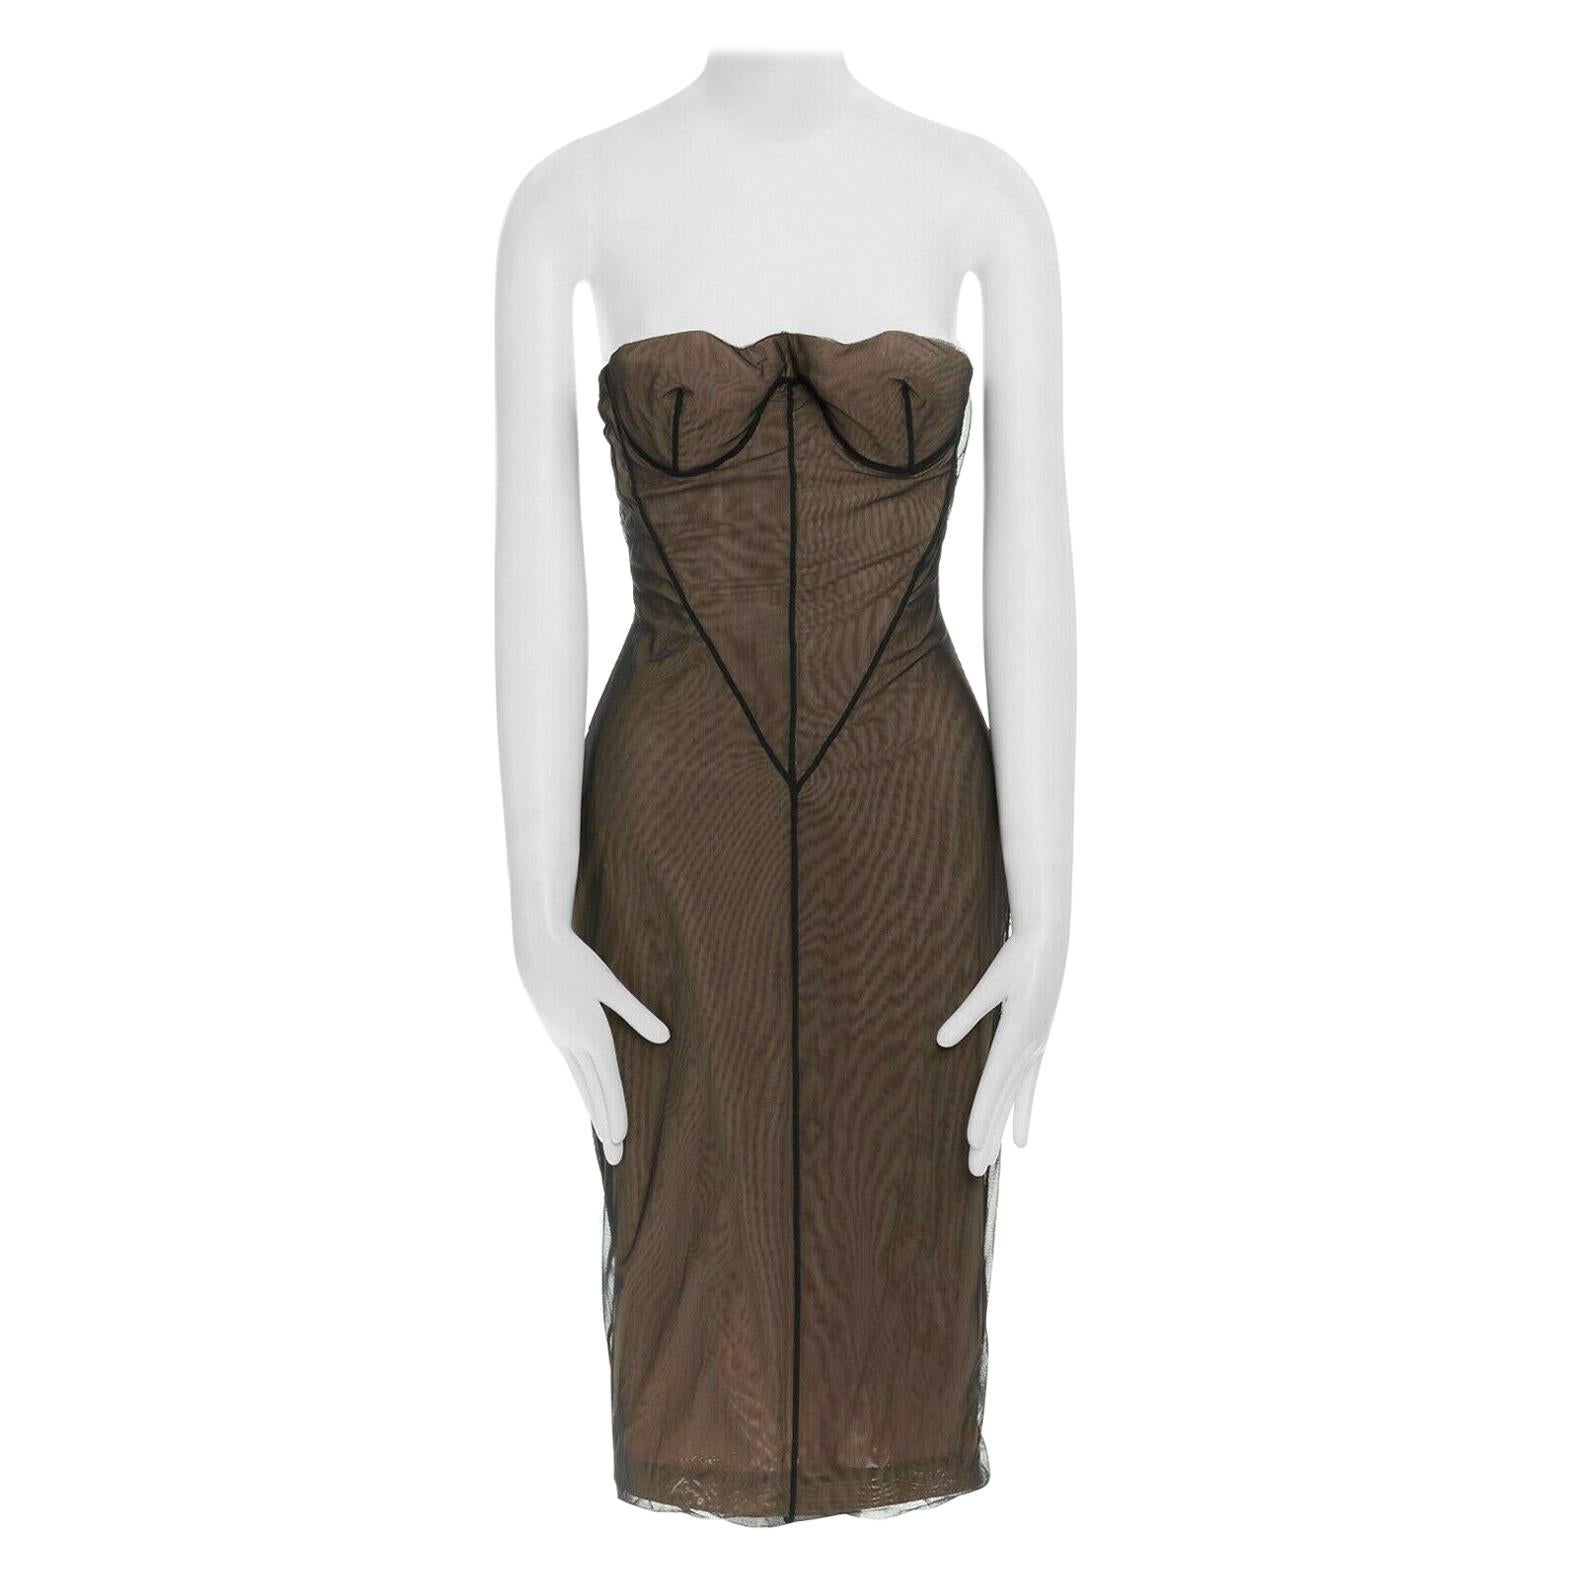 runway GUCCI TOM FORD Vintage nude mesh corset strapless cocktail dress IT40 US4